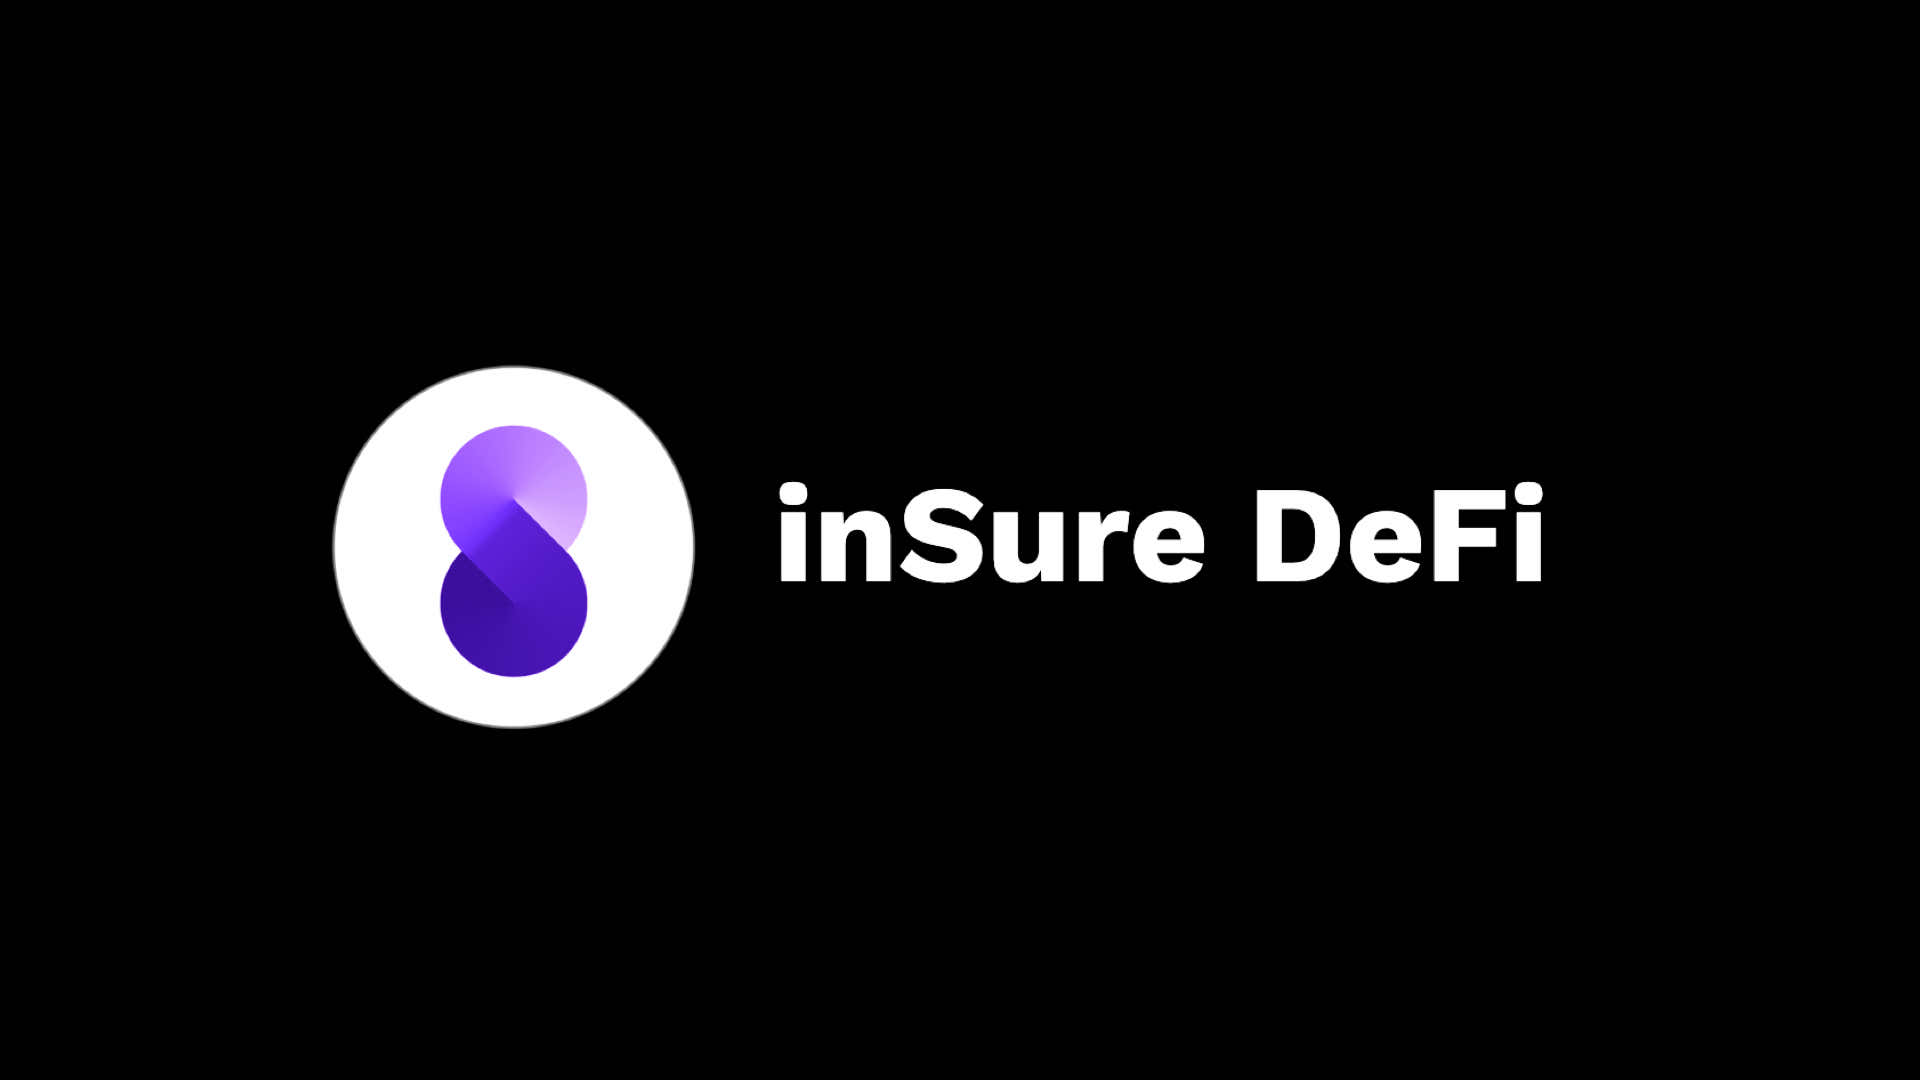 inSure DeFi Introduces Insurance for Real World Asset Tokens for Enhanced Portfolio Security